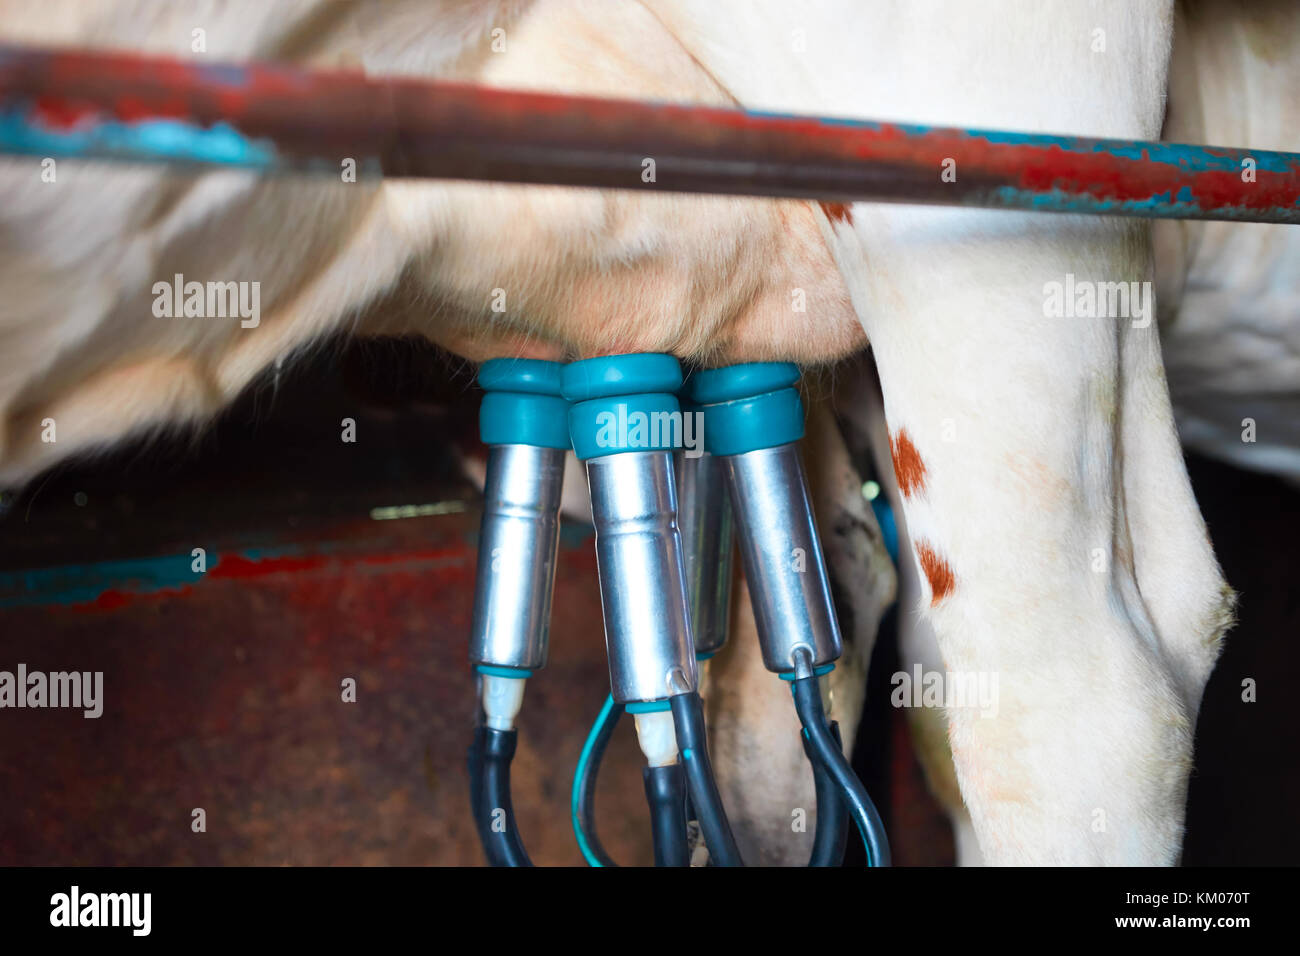 Cows utter and pipelines during milking operation, Franche Comte, France. Stock Photo